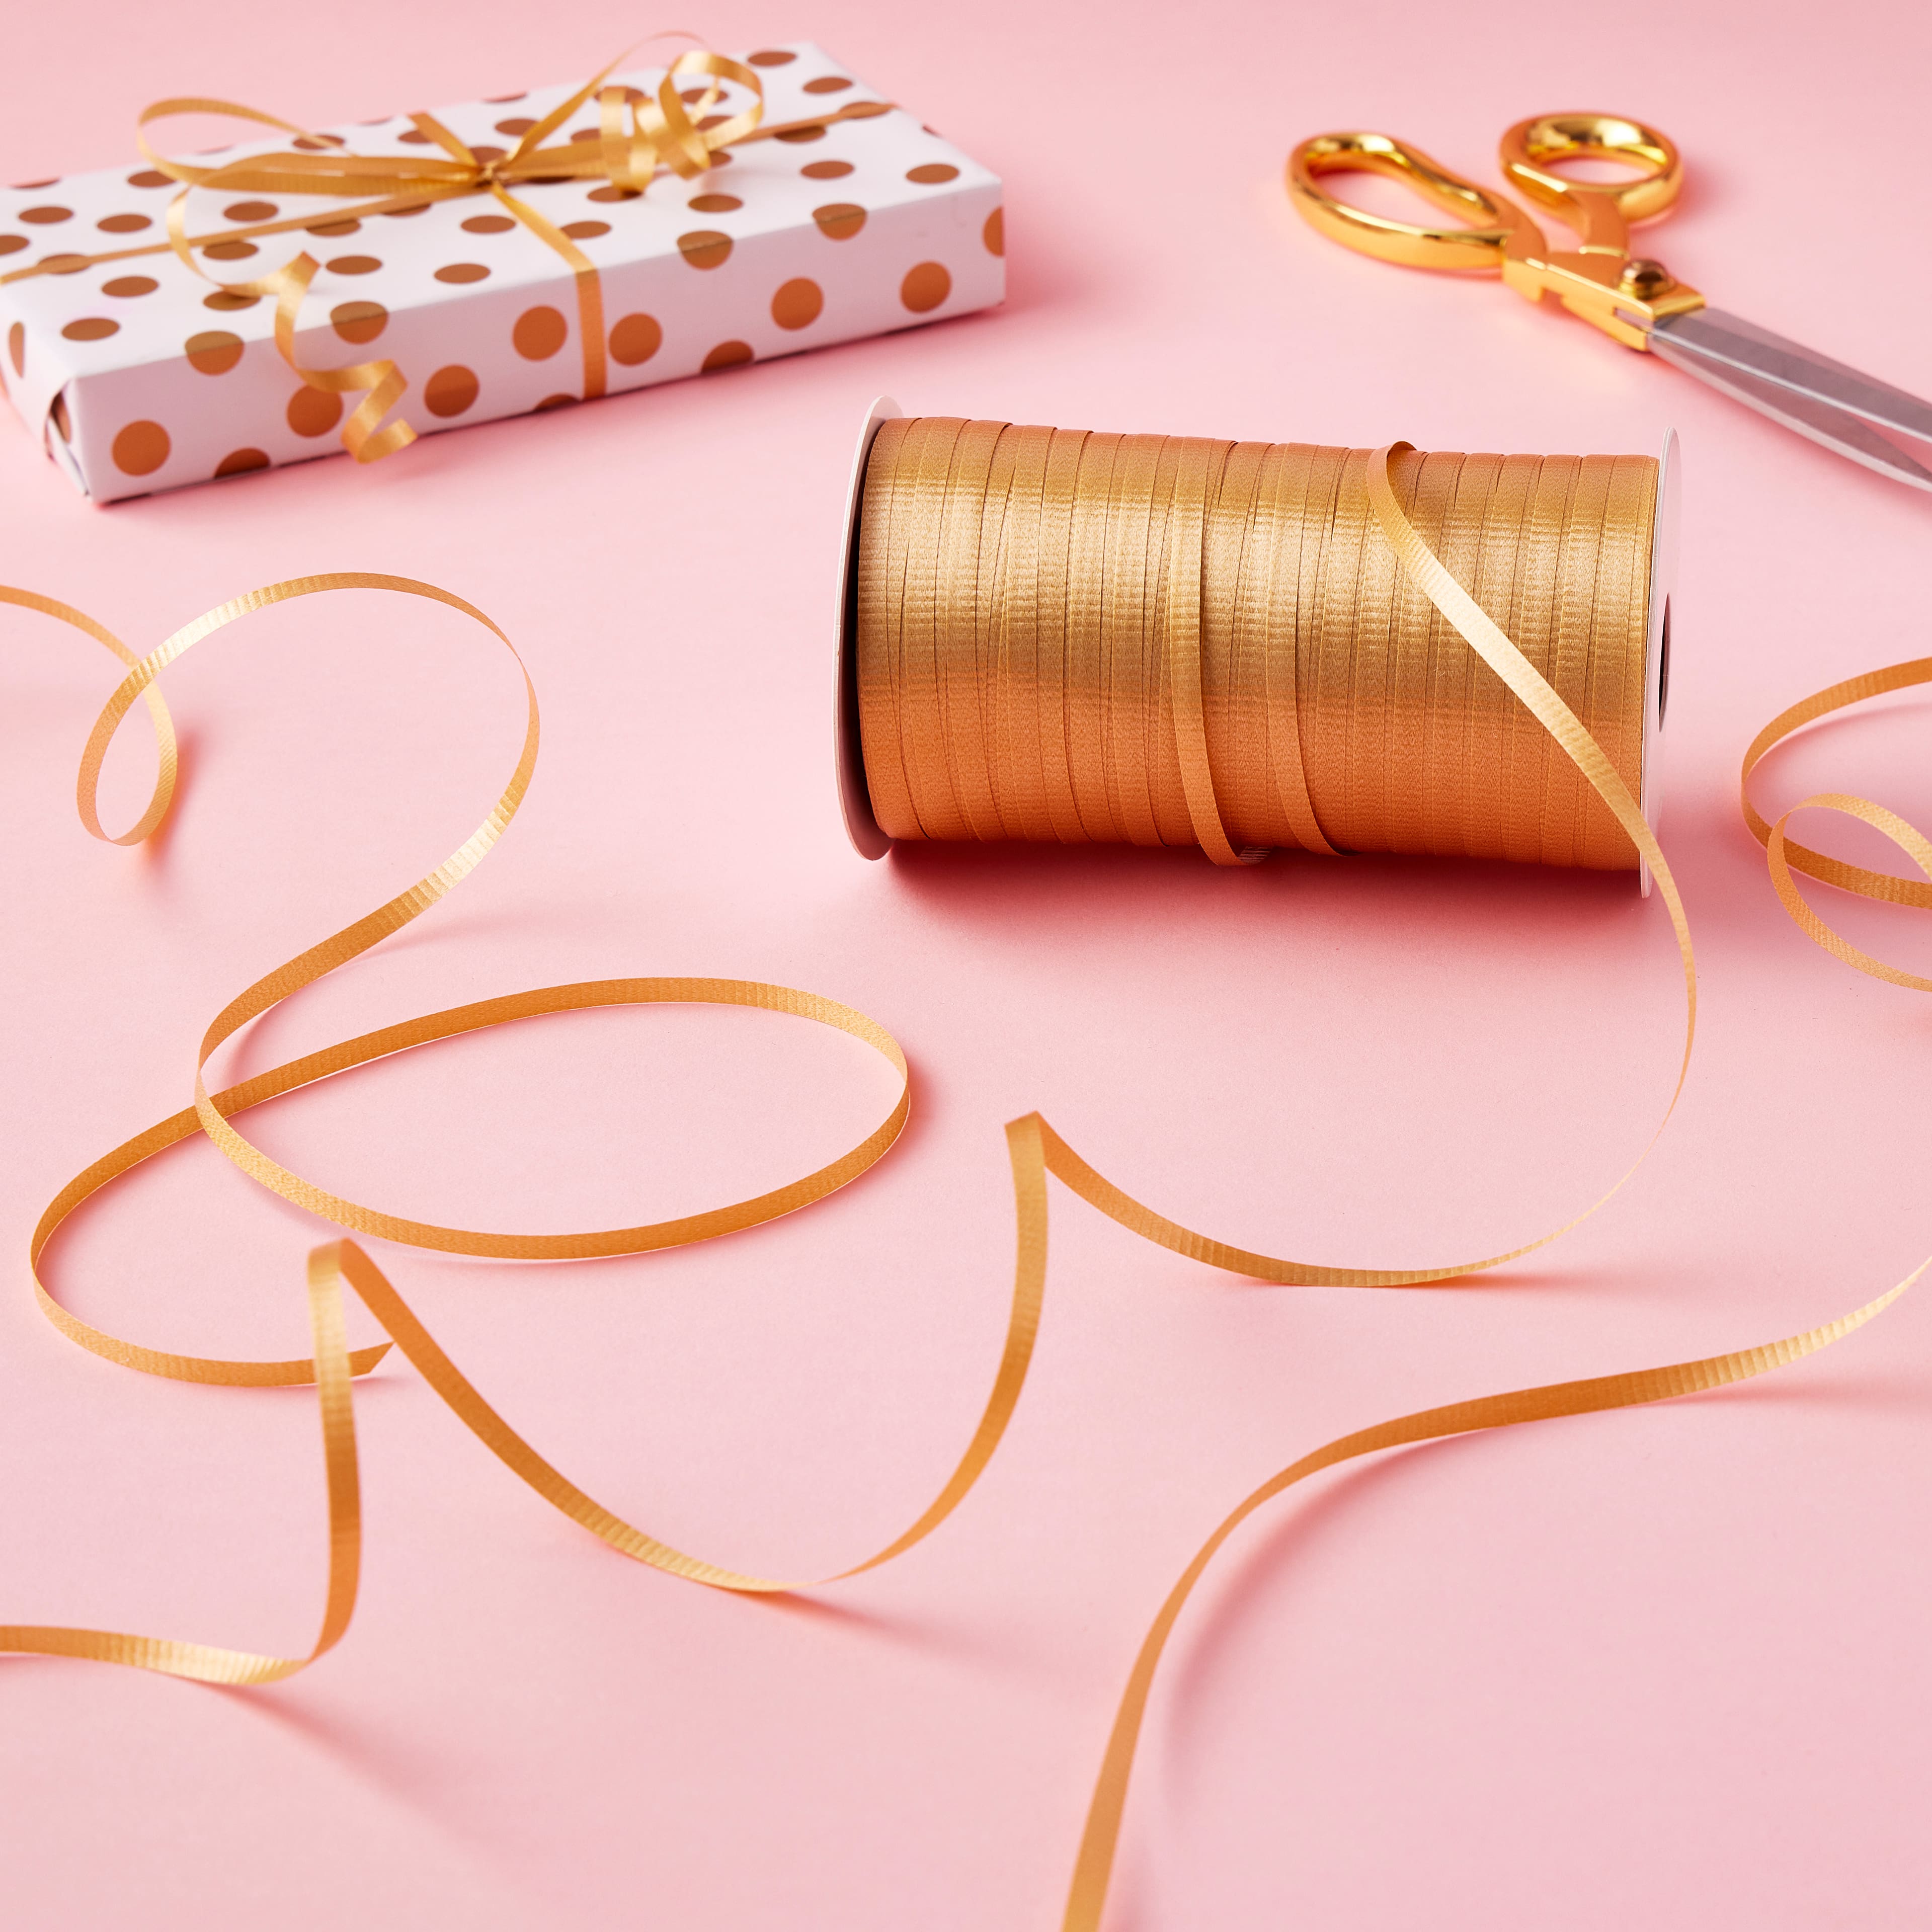 What We Learned Today: Curling Ribbon